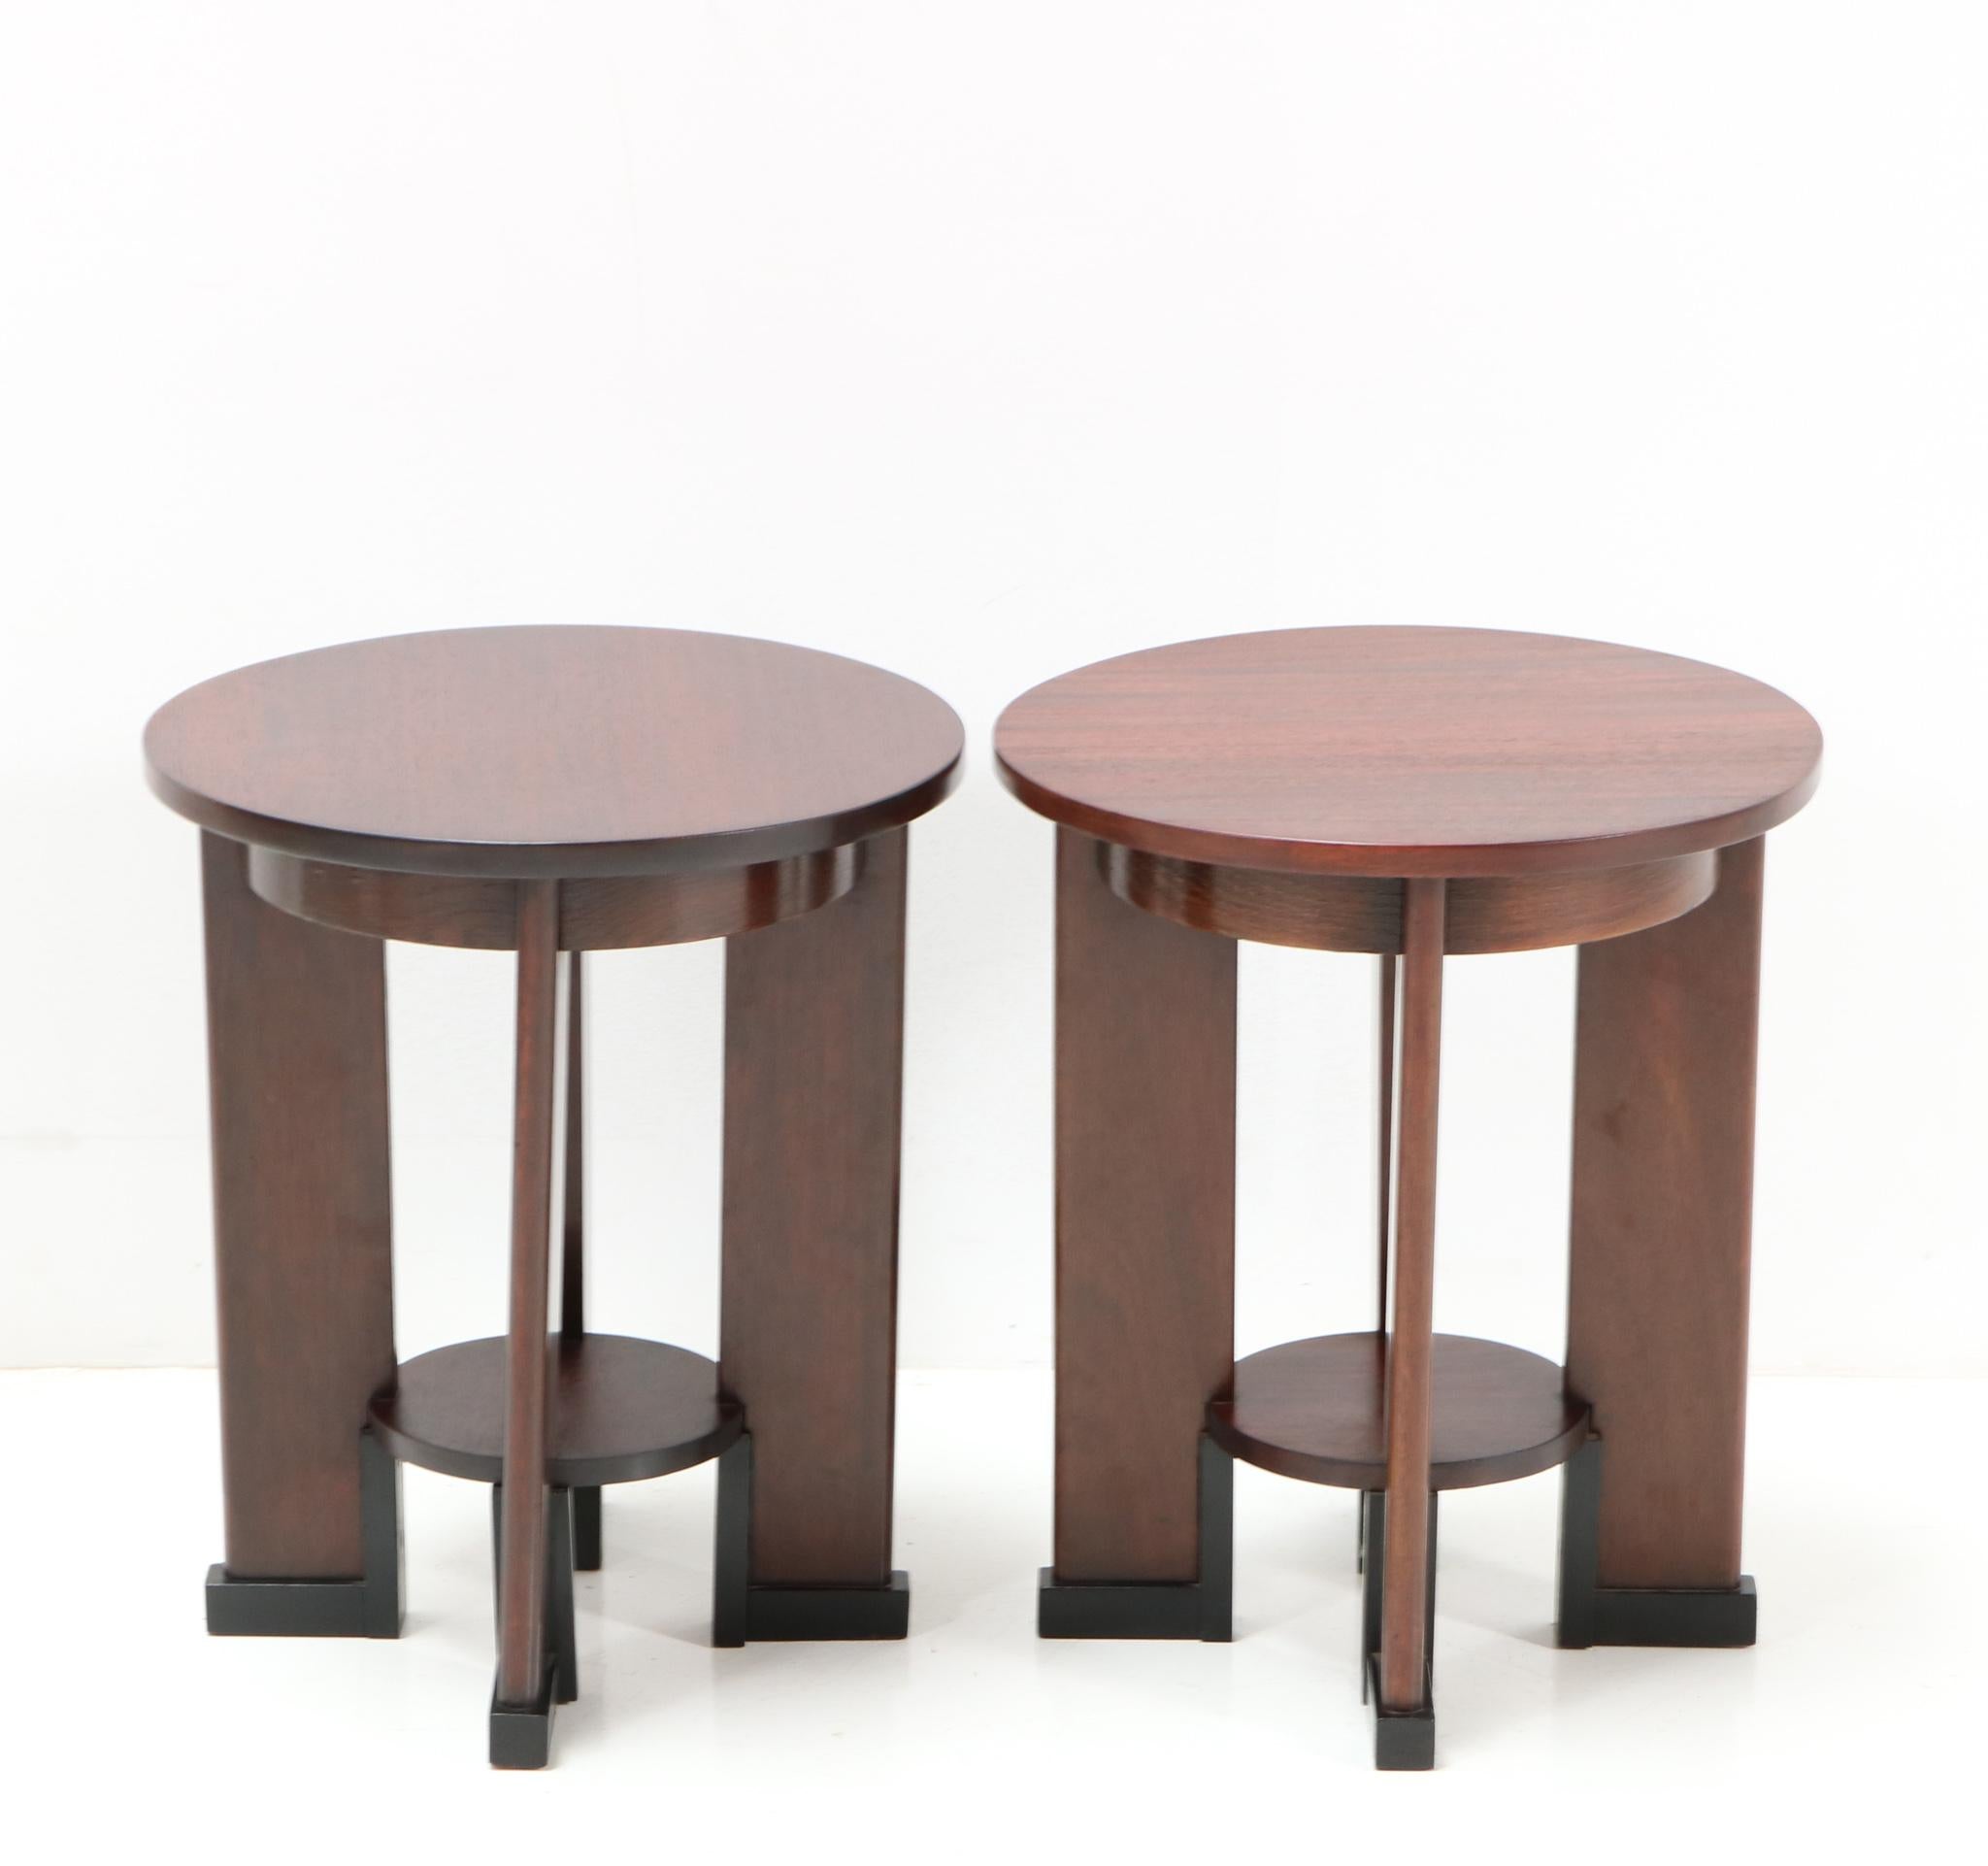 Magnificent and rare pair of Art Deco Amsterdamse School side tables.
Design by J.J. Zijfers Amsterdam.
Striking Dutch design from the 1920s.
Solid walnut base with solid walnut top.
Original black lacquered lining.
This wonderful pair of Art